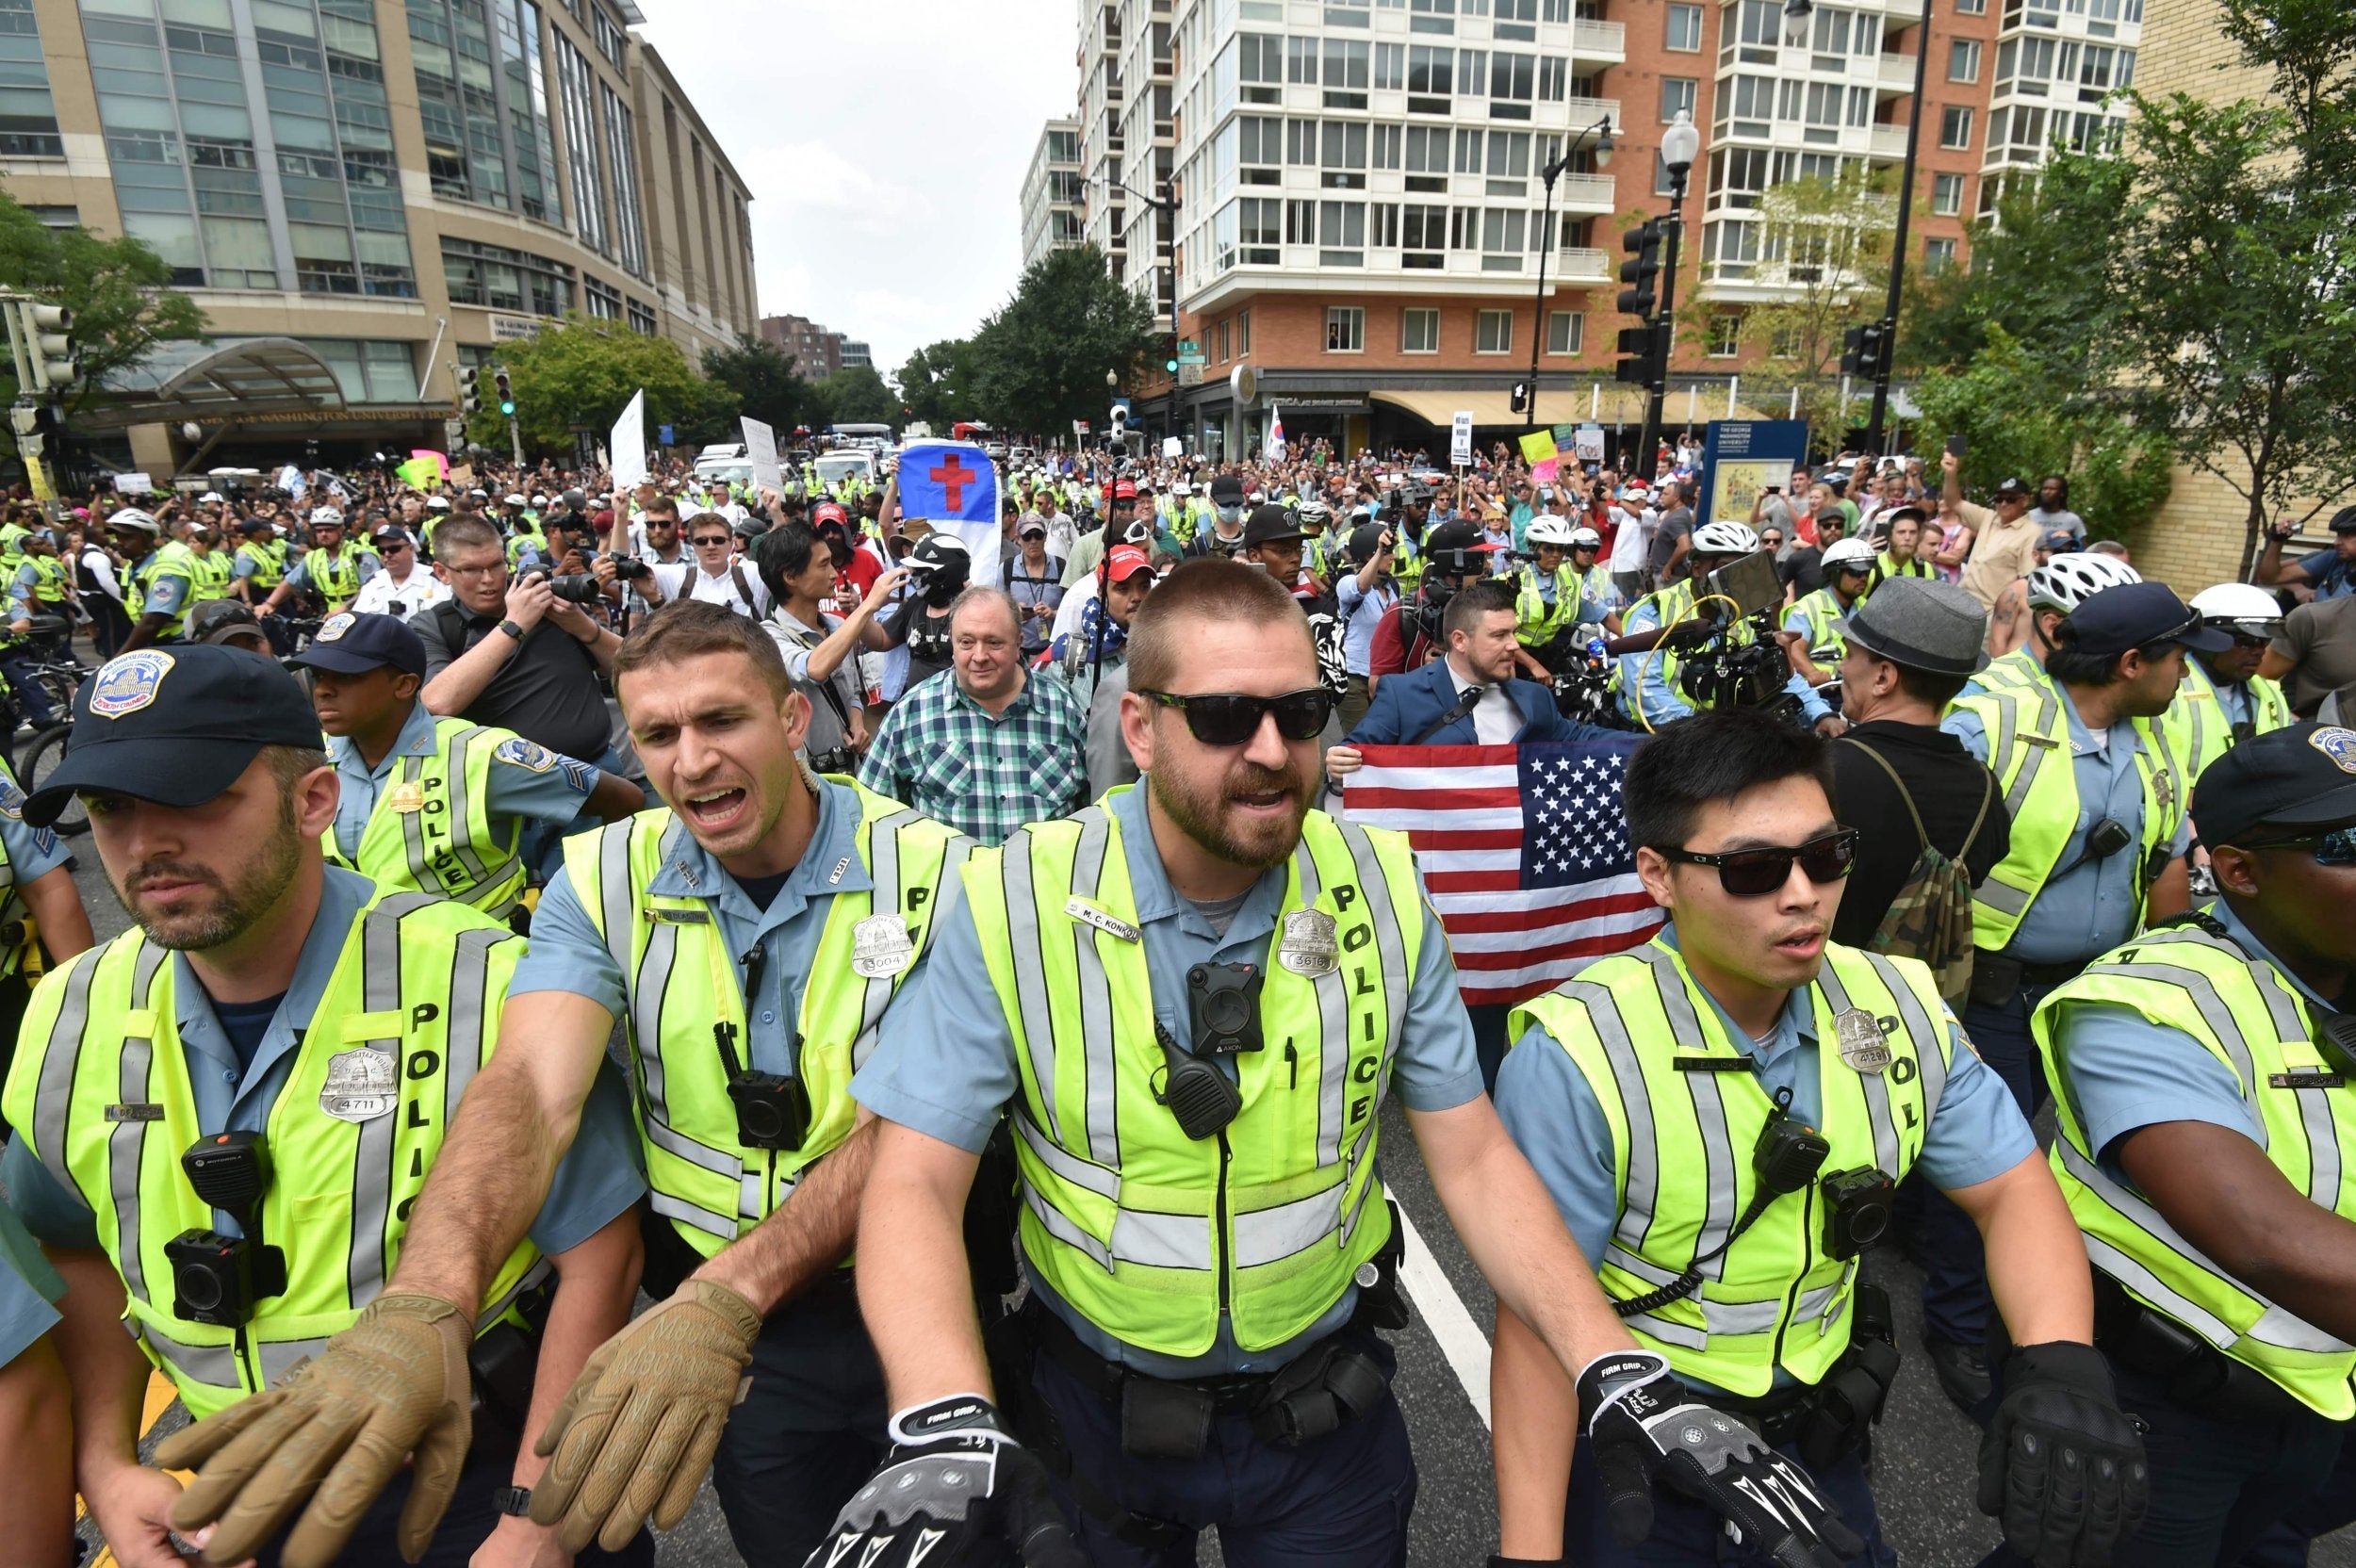 Counter demonstrators lined up and pushed against a police barricade in DC outside of the White House